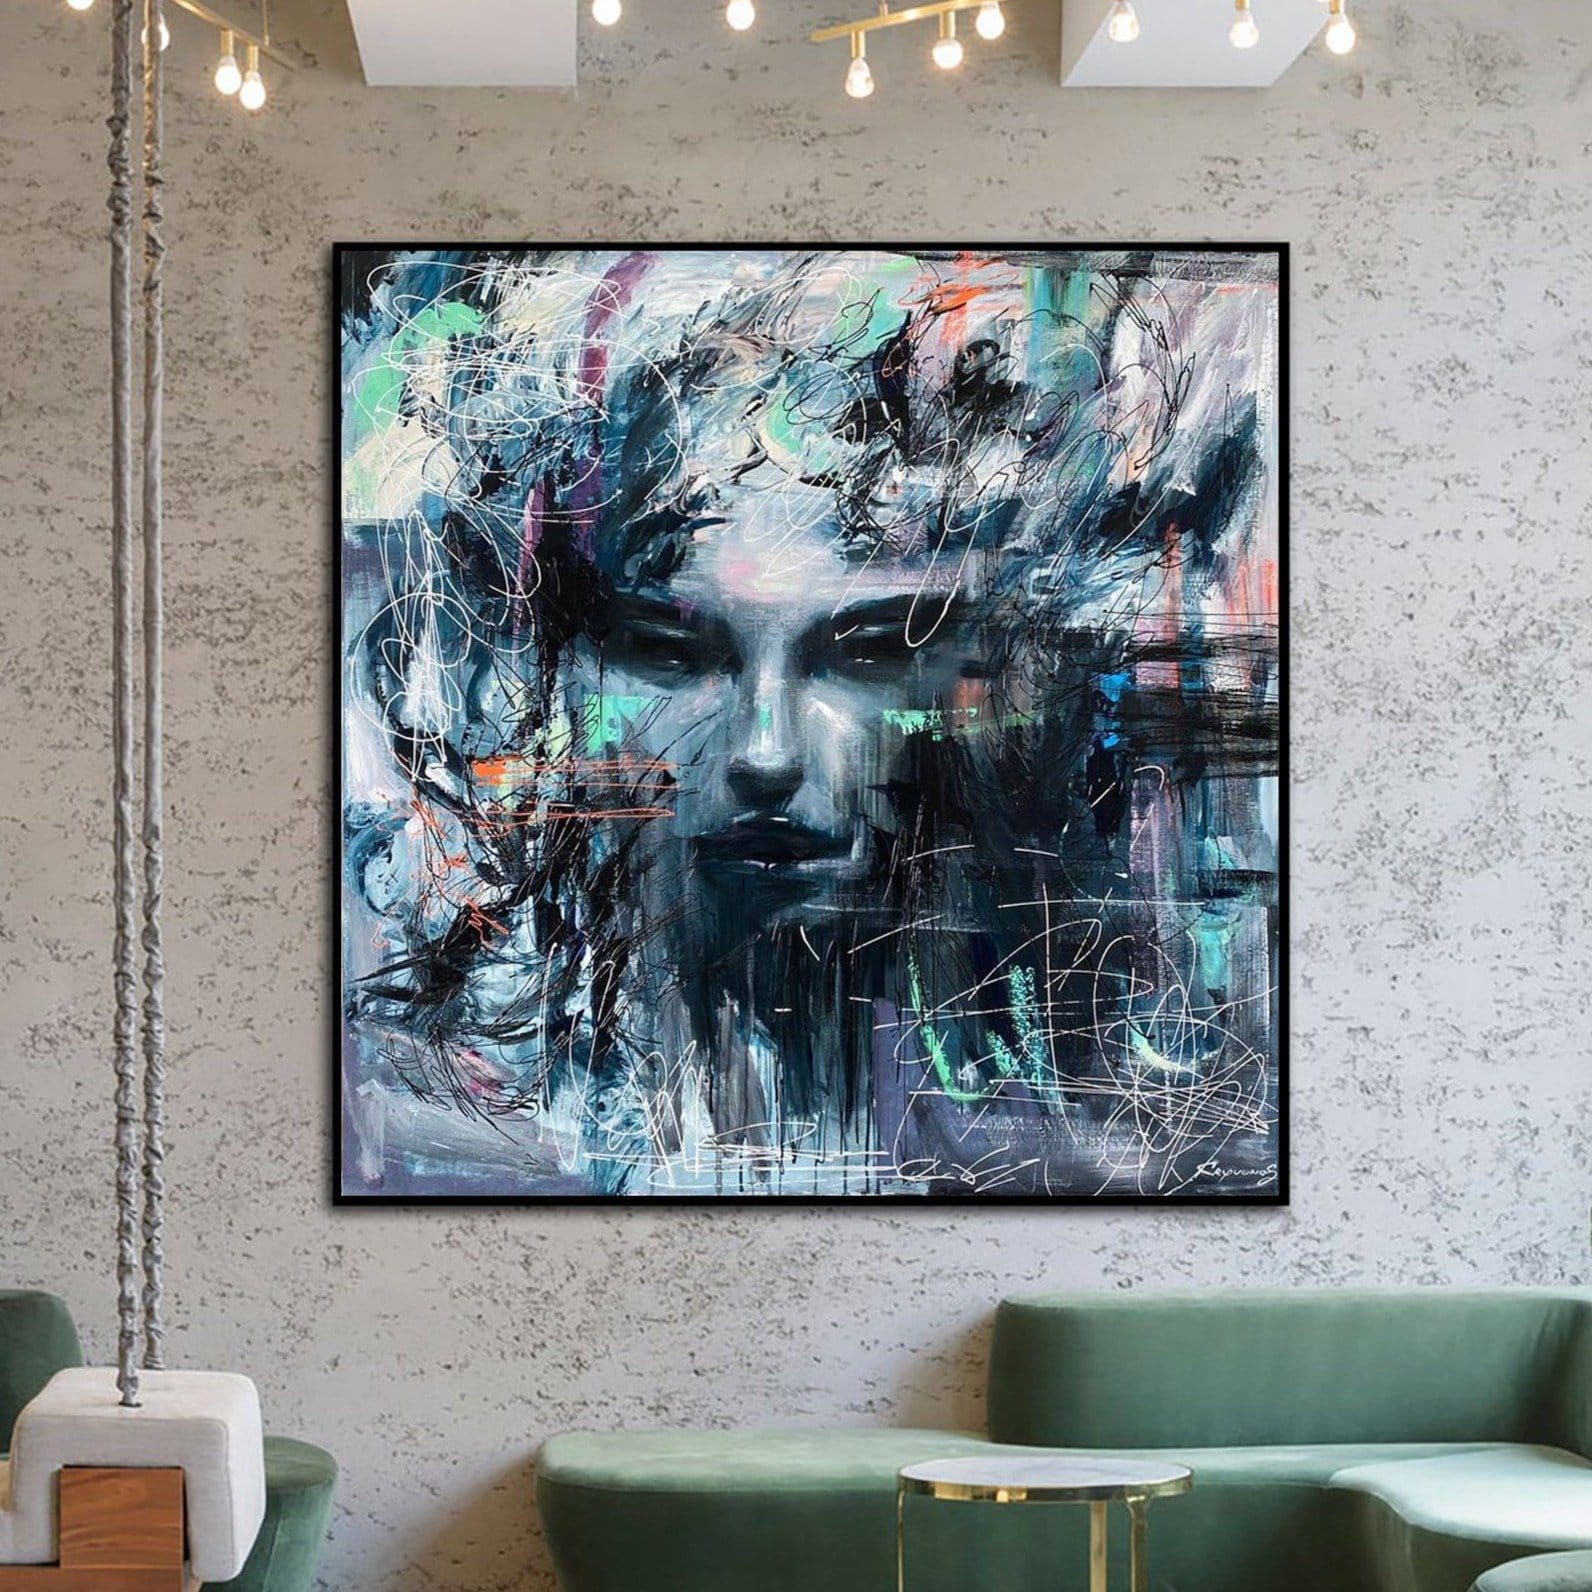 Large Wall Art Paintings For Sale, Original Artwork On Canvas, Extremely  Modern Luxury Decor - Beauty in Blue 2